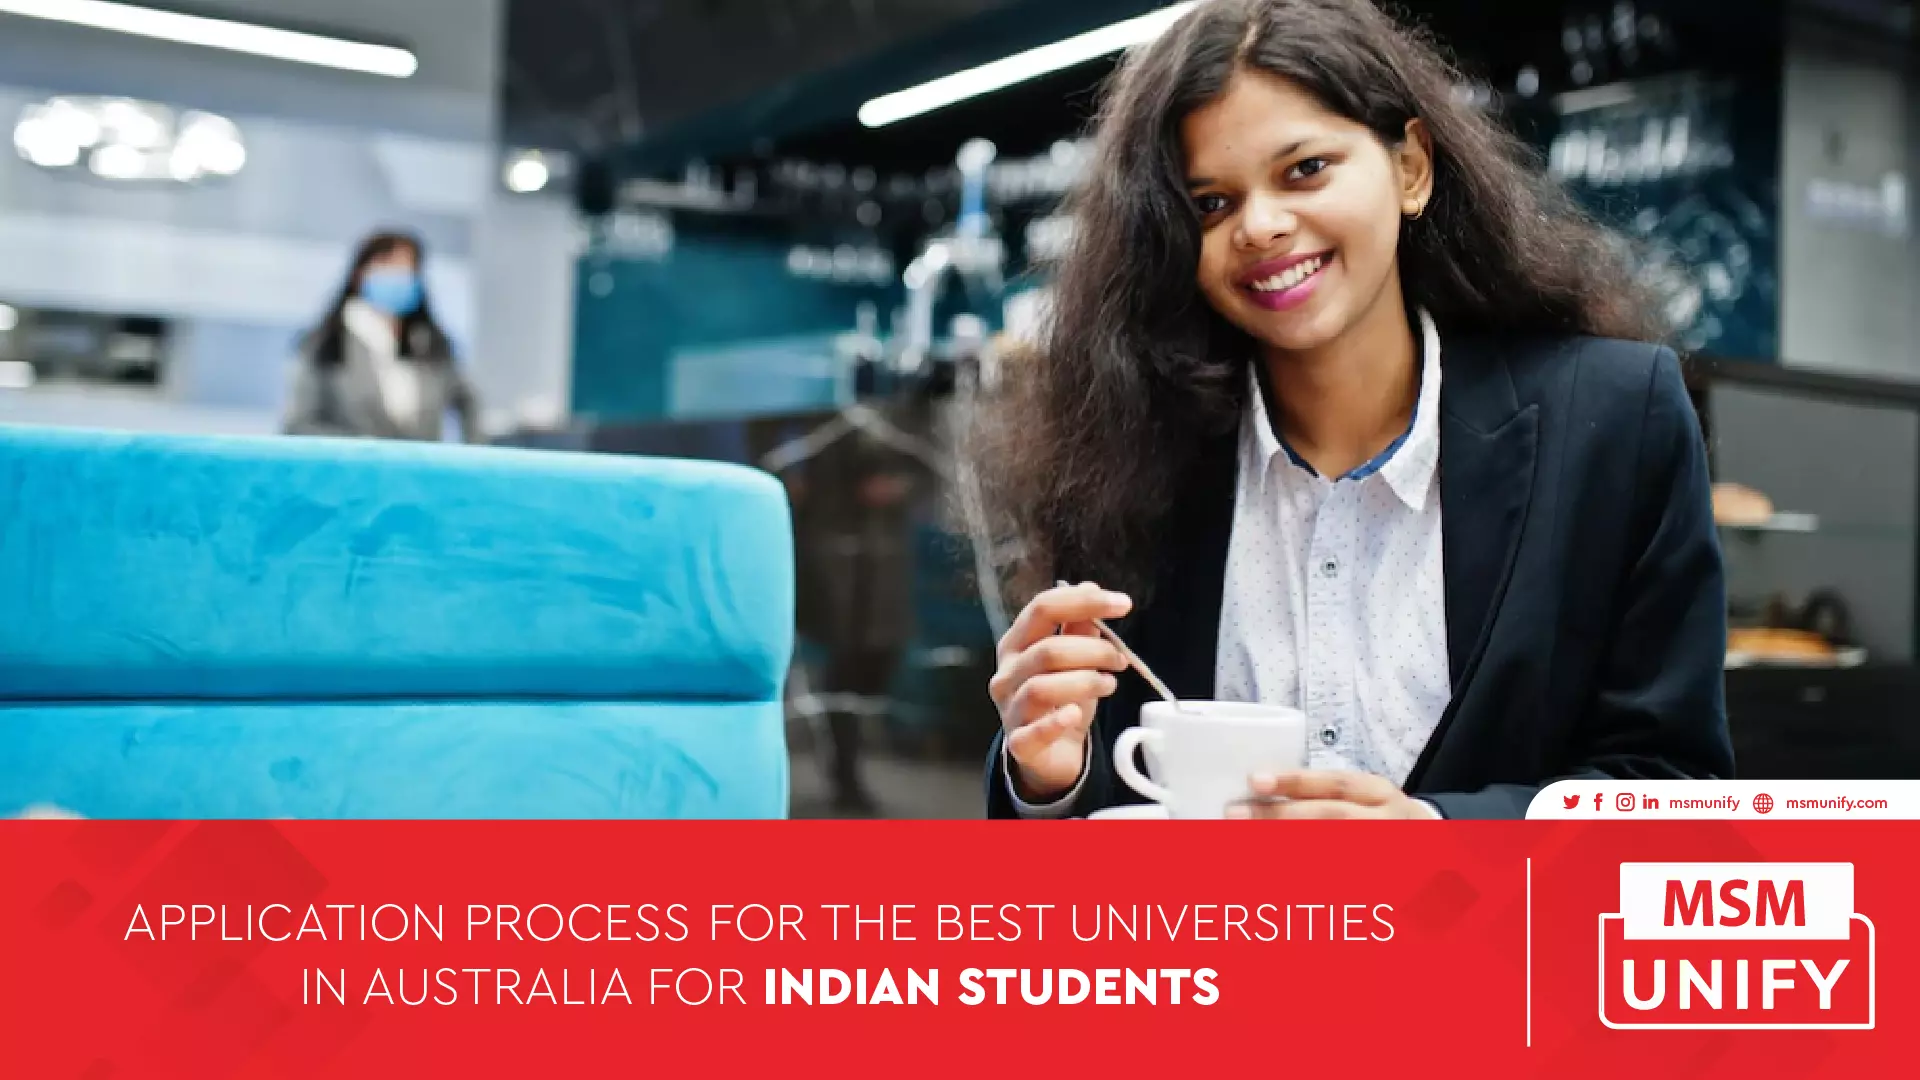 122822 MSM Unify Application procees for best universities in AUS for Indian Students 01